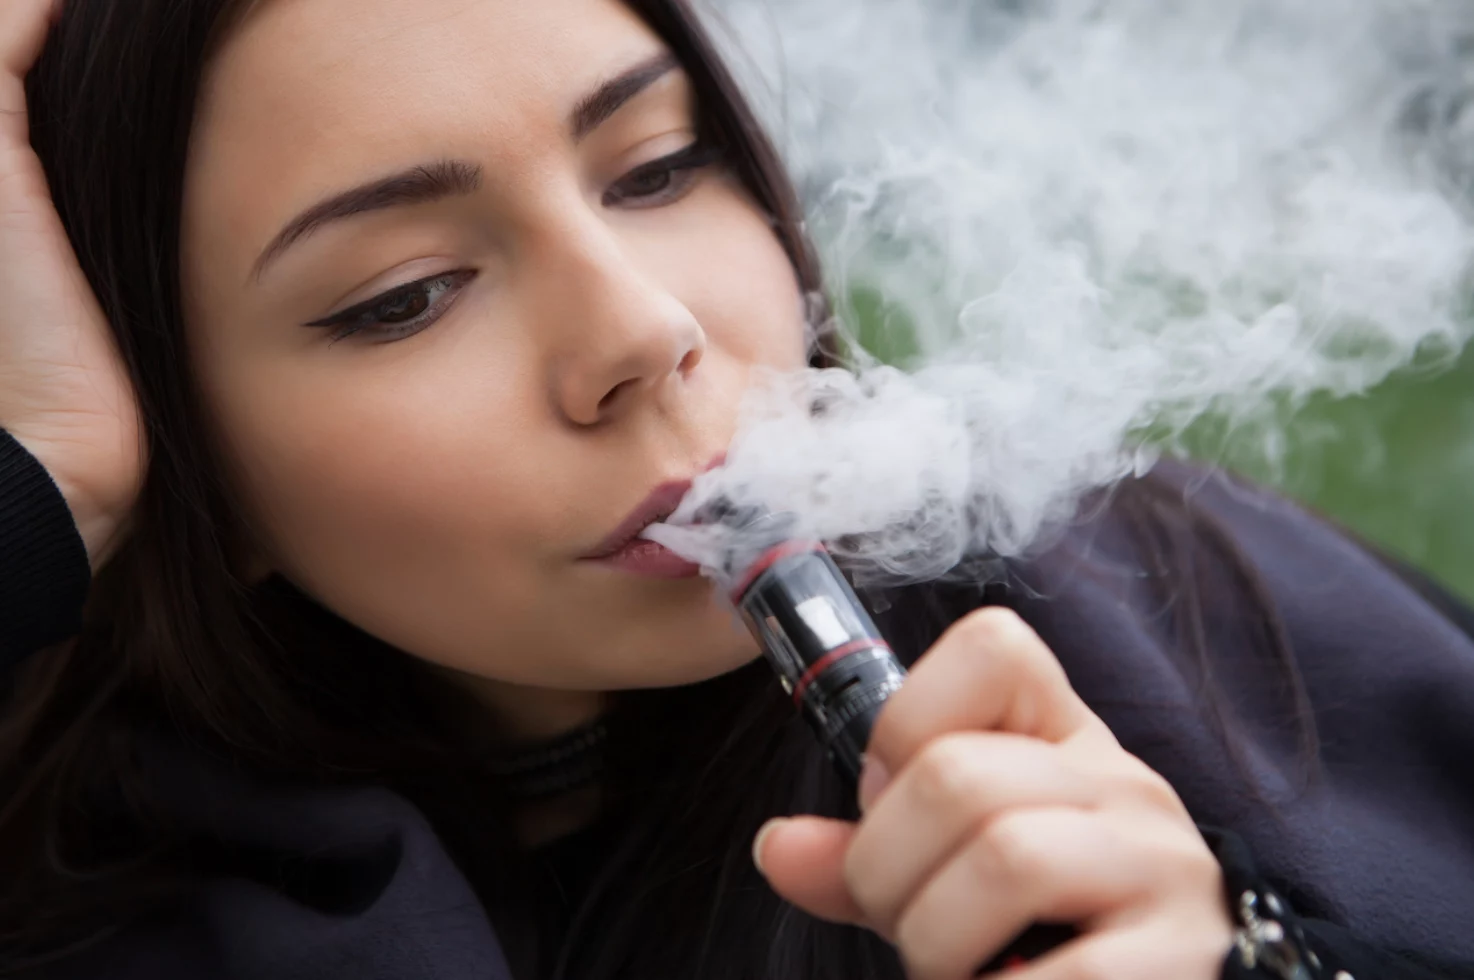 Individuals Who Smoke E-Cigarettes Have 15% Higher Risk of Stroke at Young Age